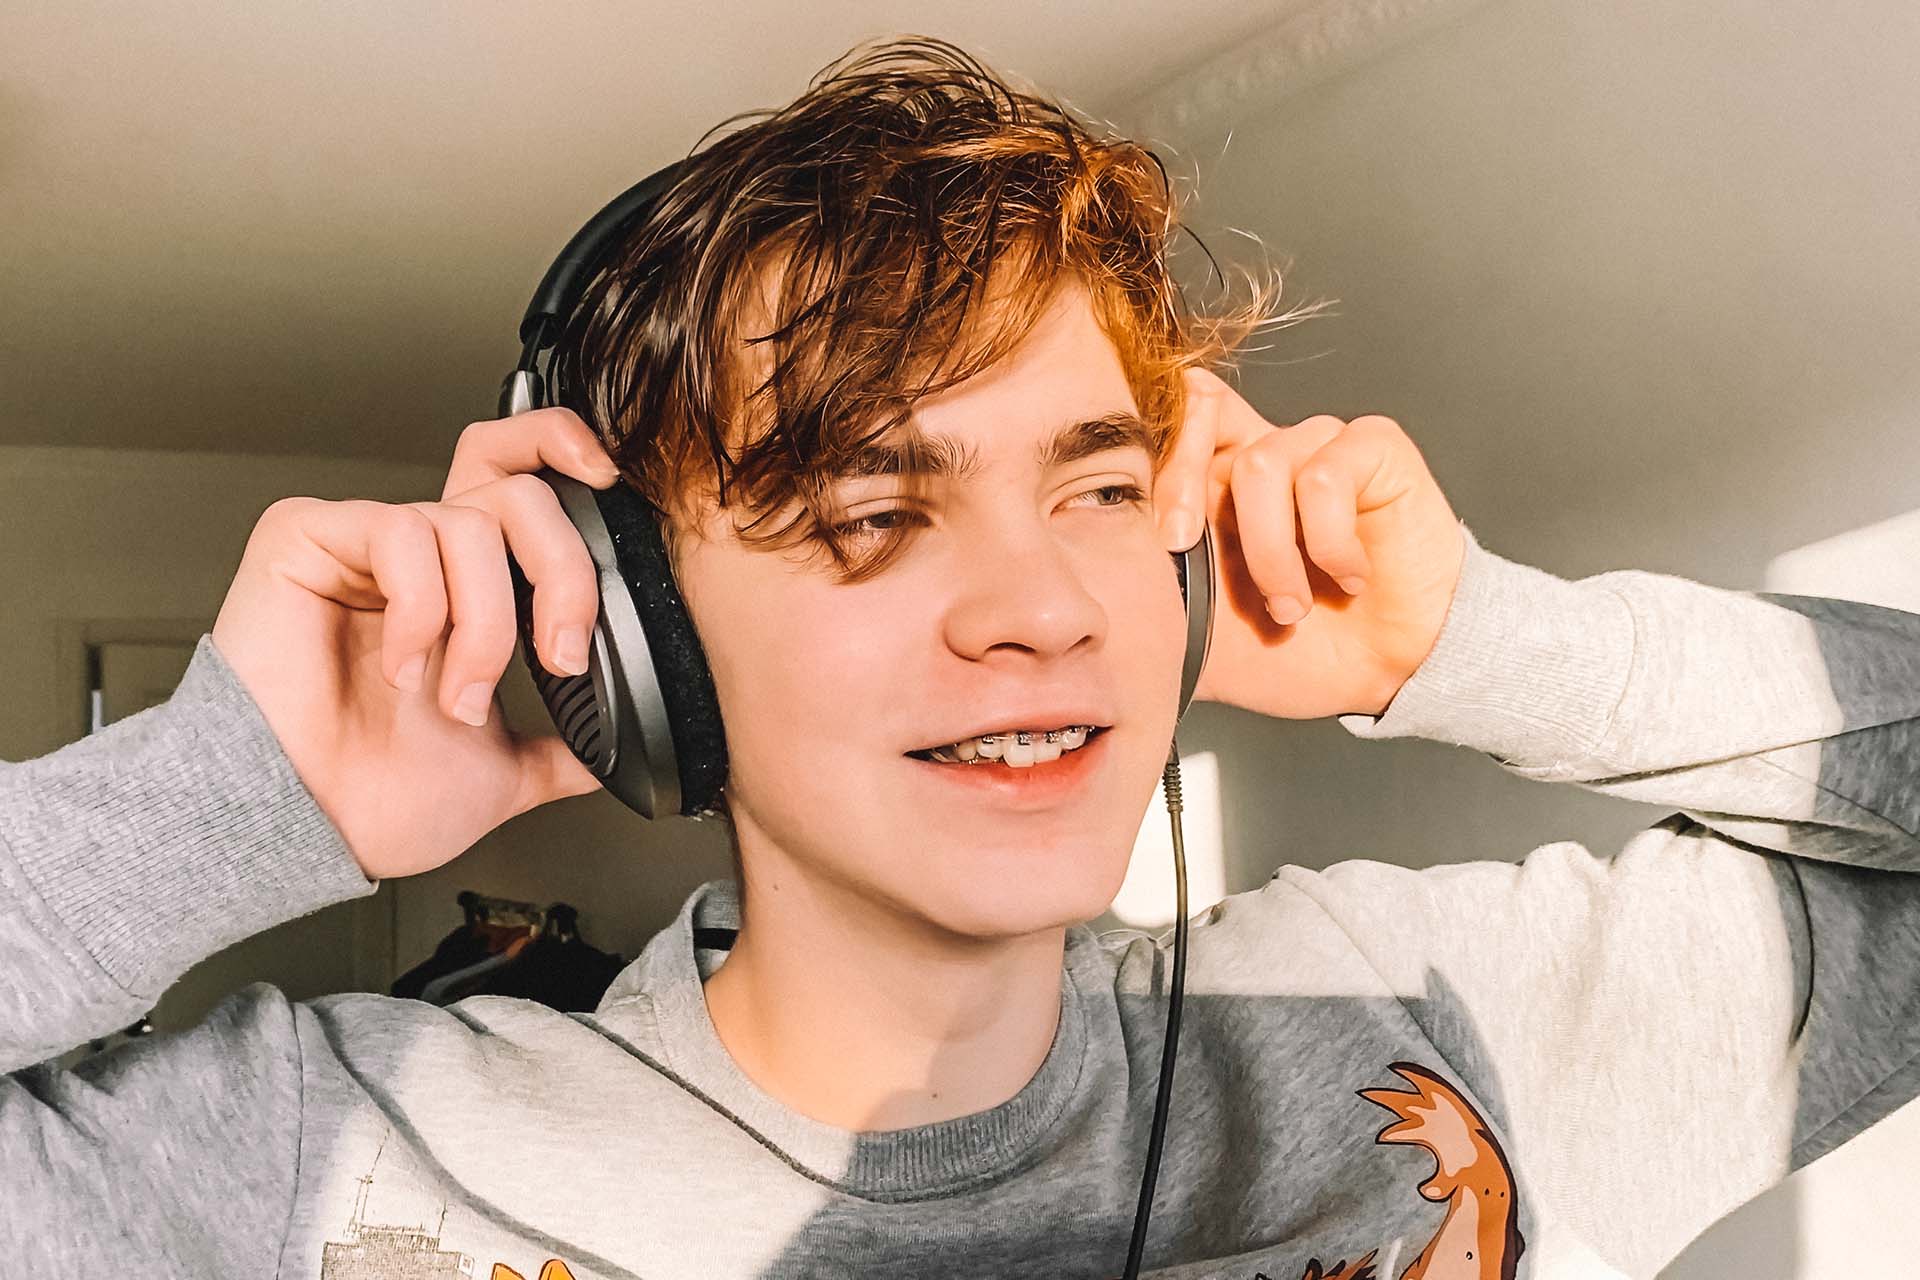 Teen boy with braces listens to music on headphones in Los Angeles, CA